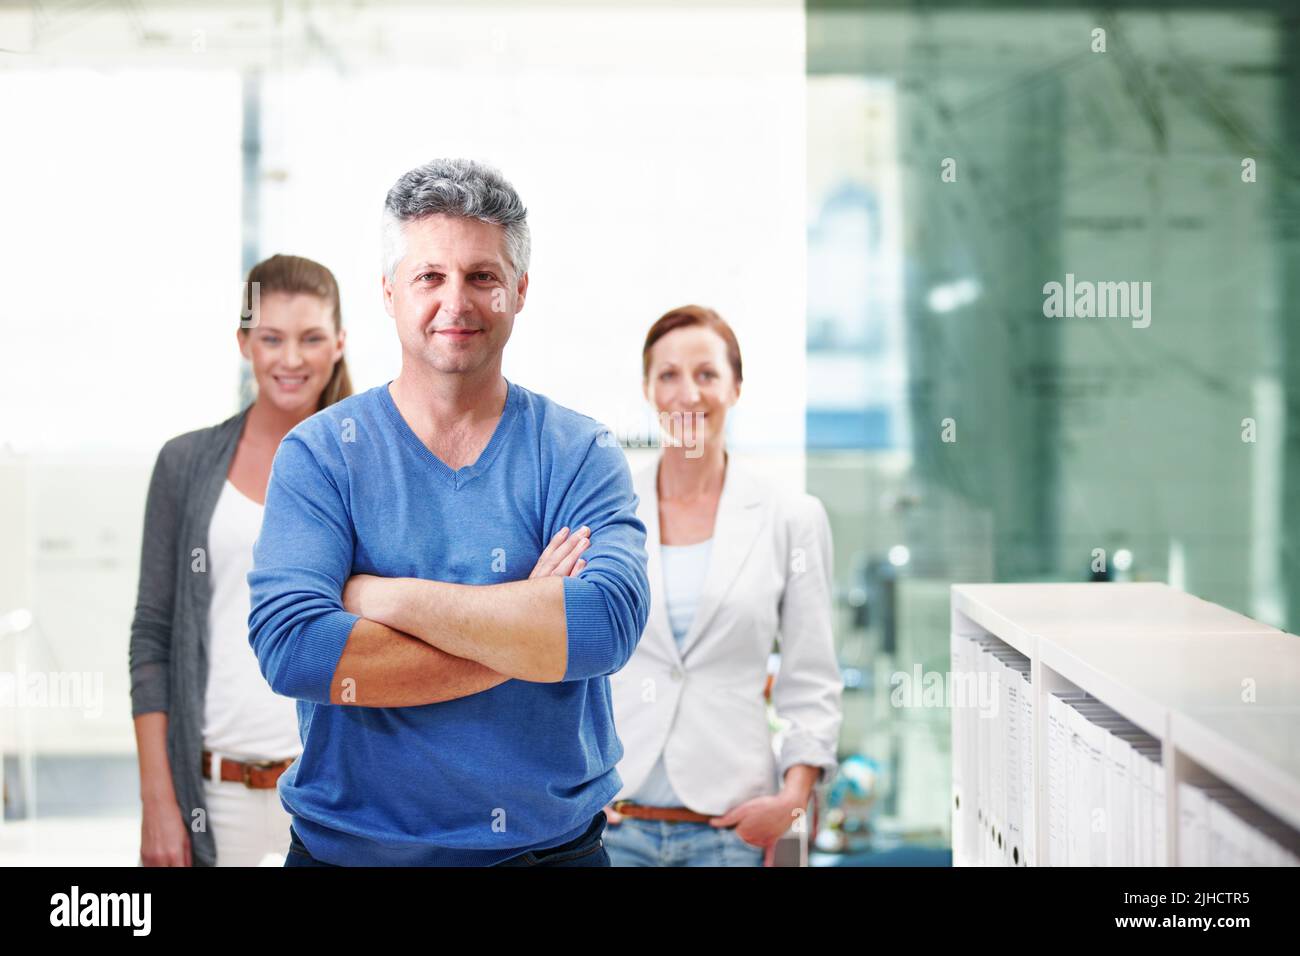 Hes got a wealth of experience. An mature businessman standing confidently with his co-workers behind him. Stock Photo